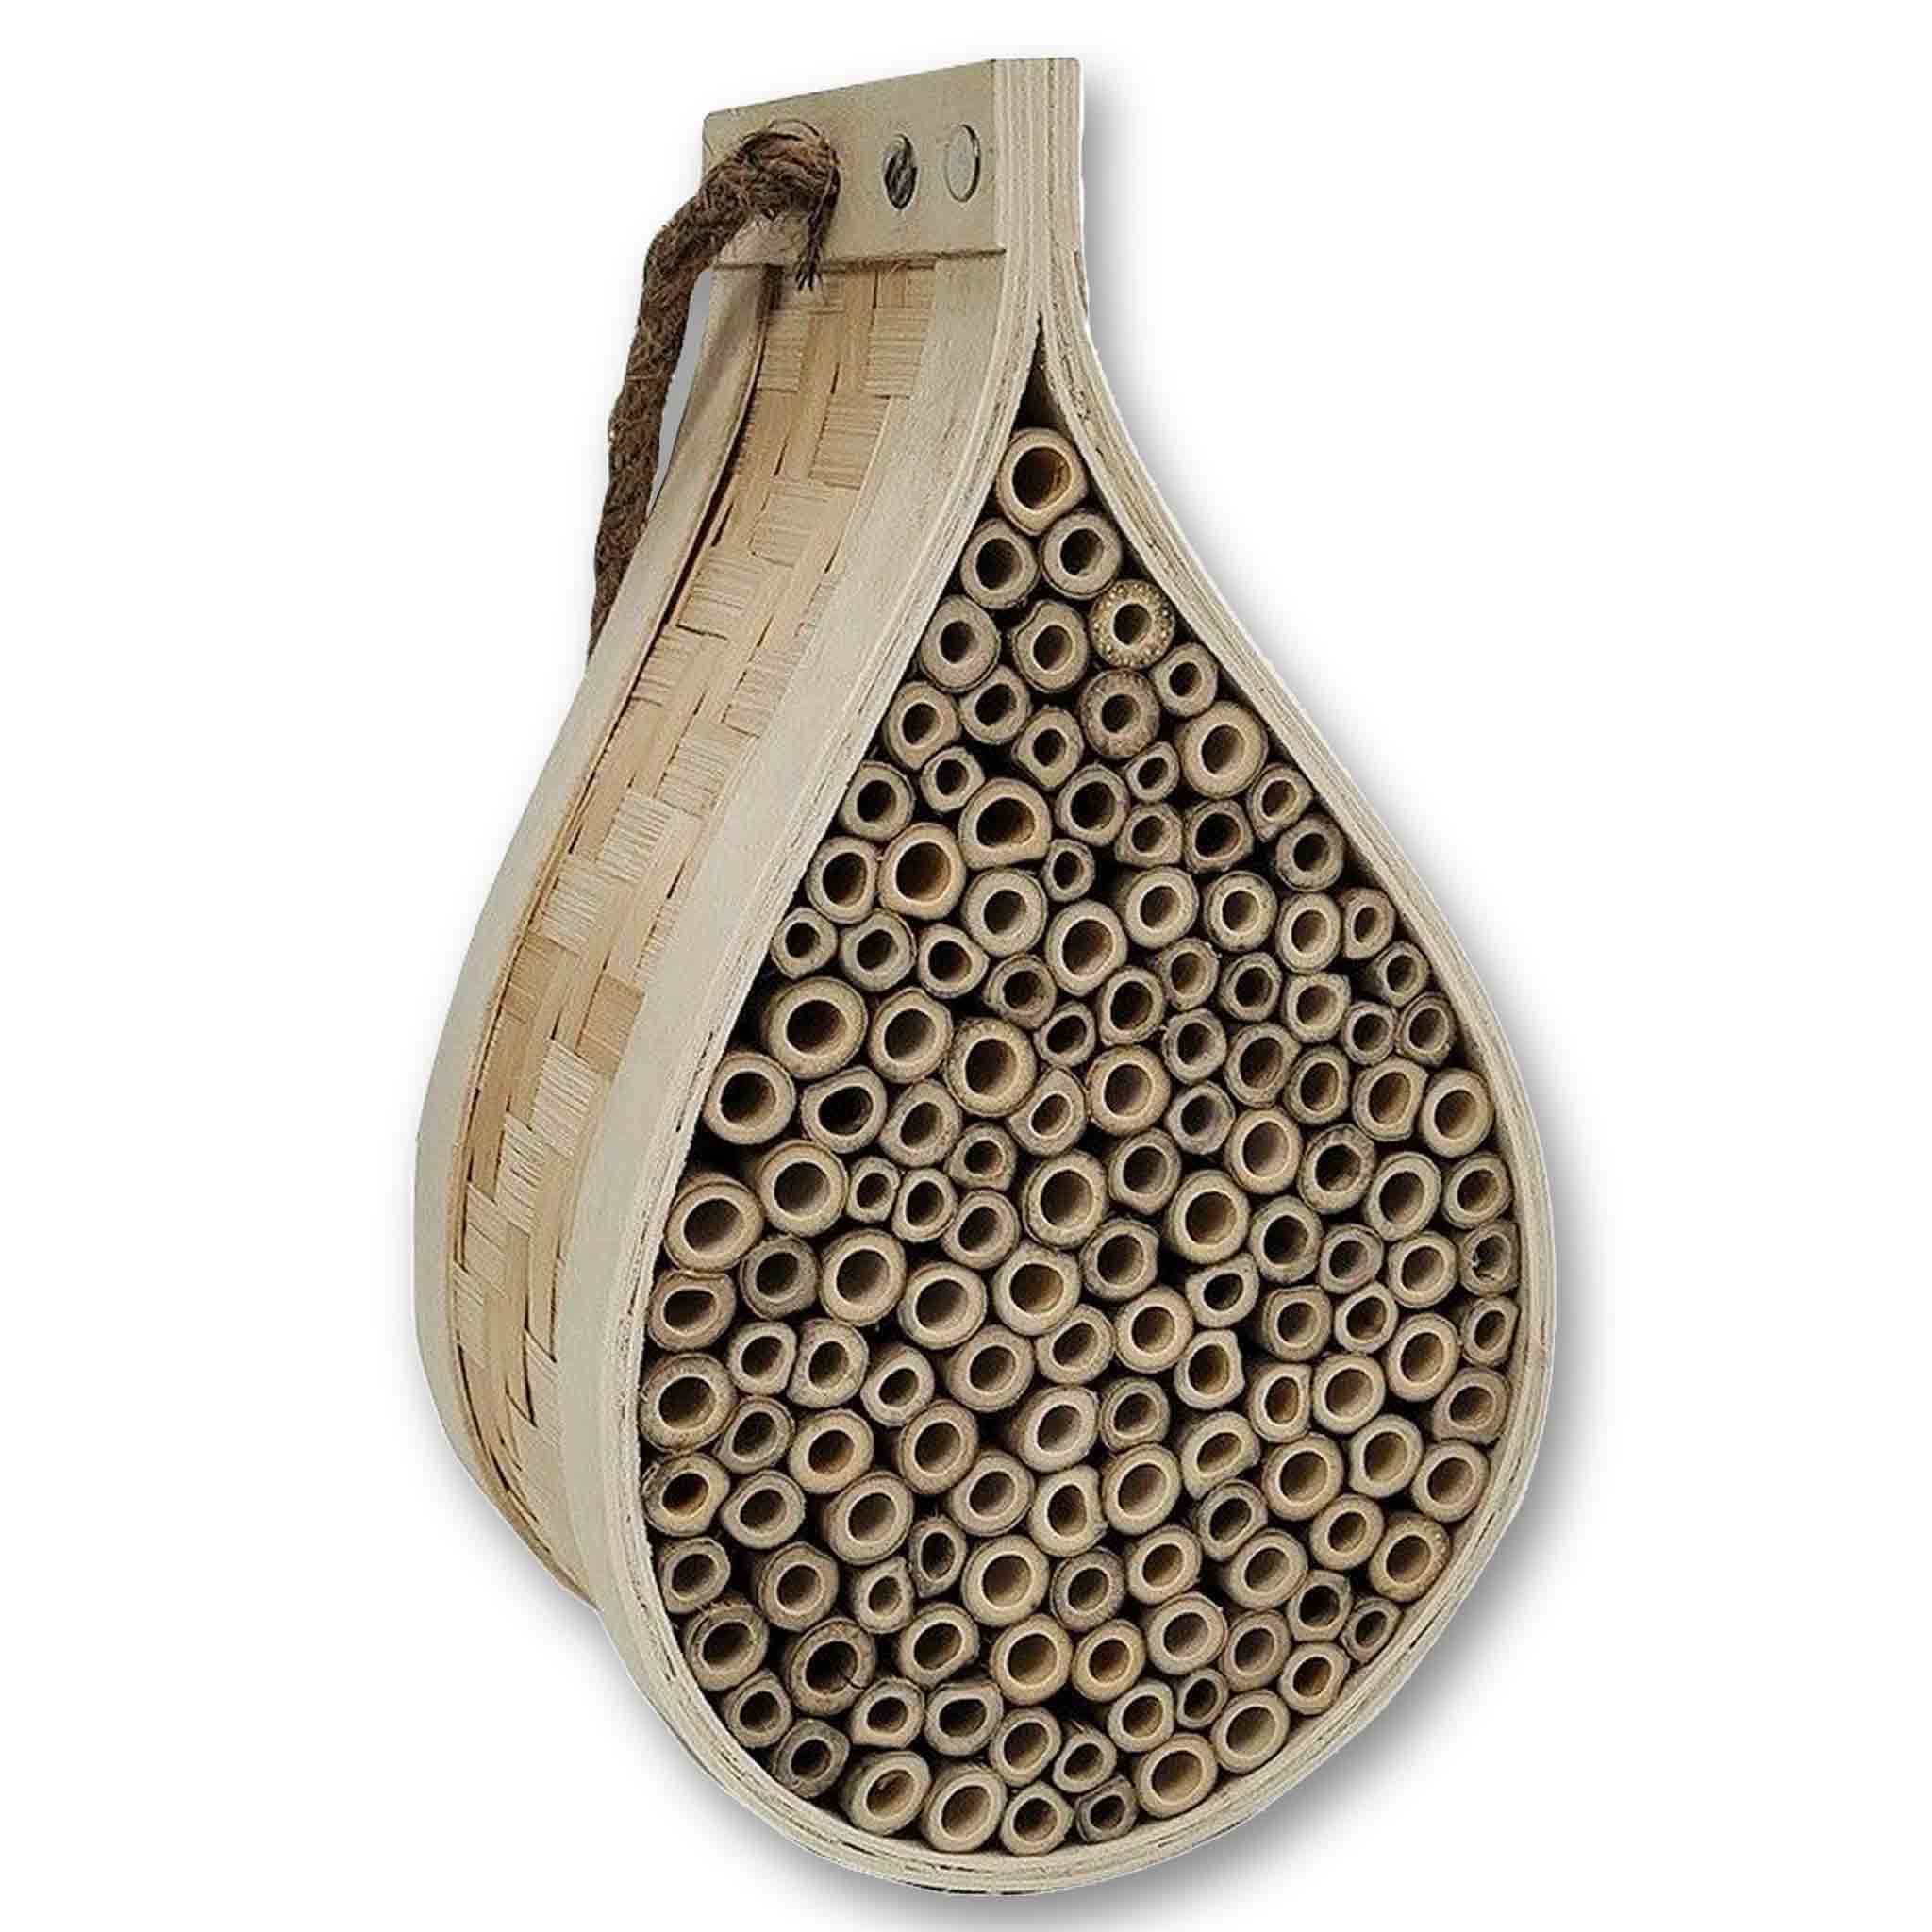 Buzzbee Mason Hive for Native Bees - Hives collection by Buzzbee Beekeeping Supplies